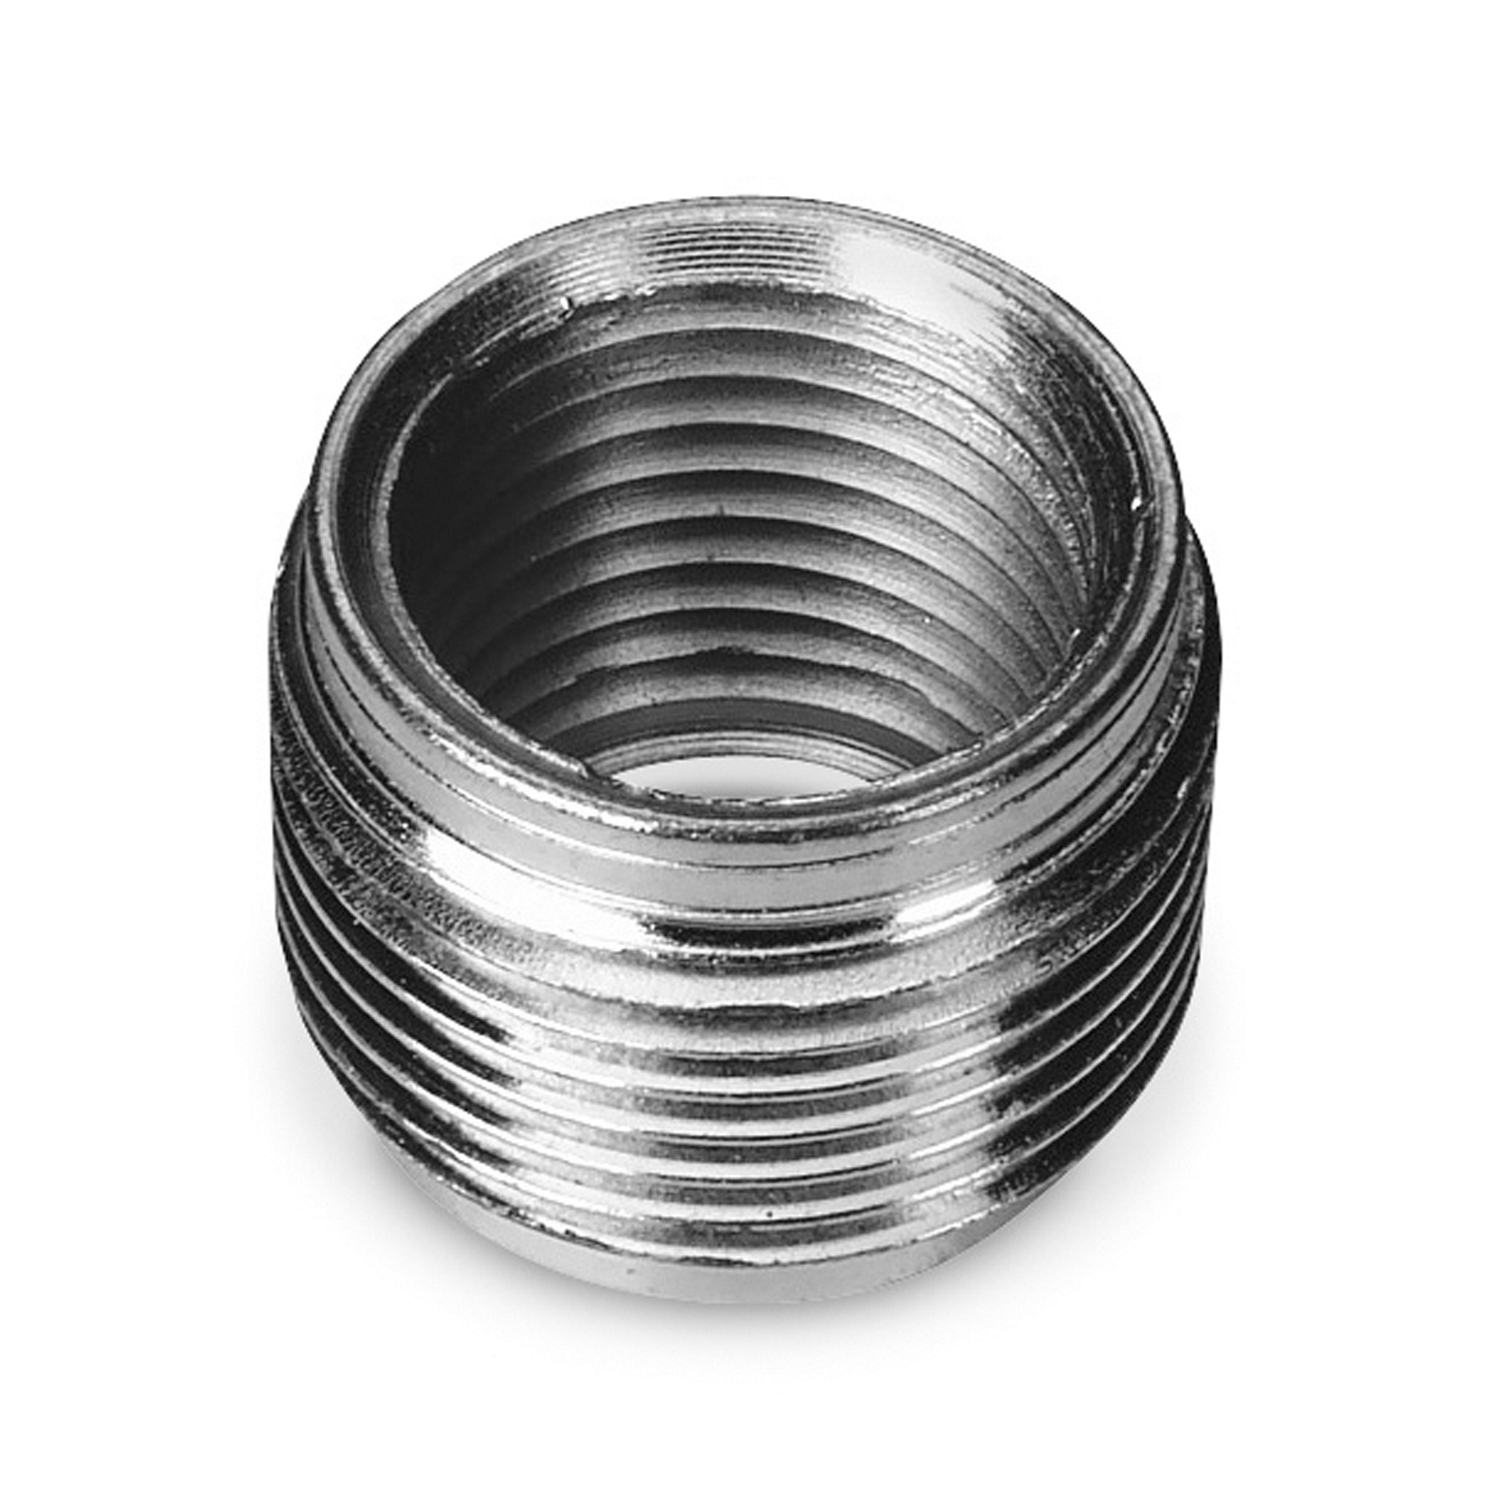 Zinc Plated Steel Reducing Bushing 4 to 2 in 